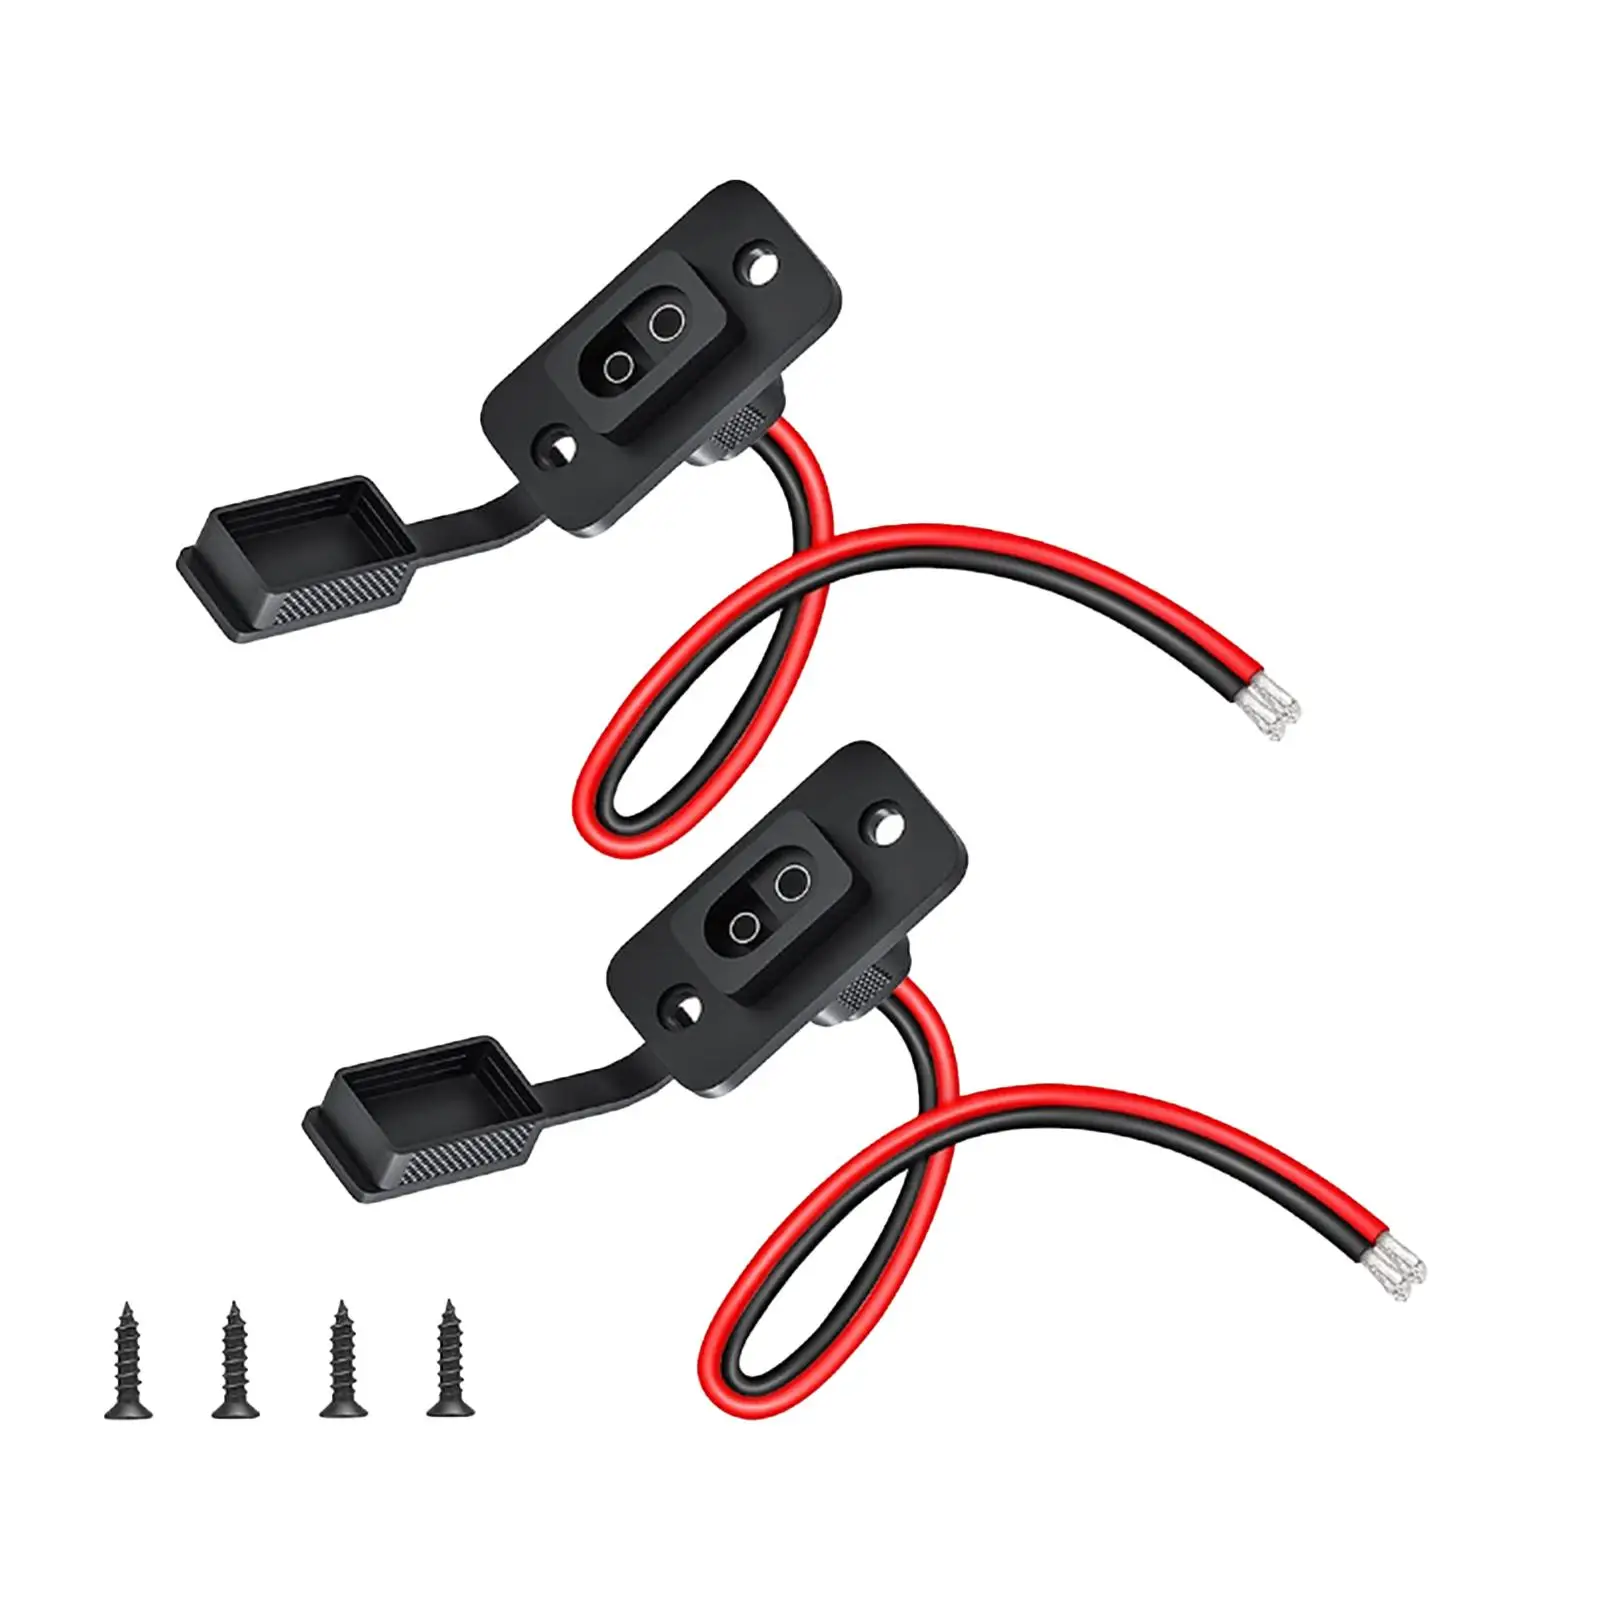 2 Pieces SAE Socket Motorcycle Waterproof Cap 2 Holes RV Car Battery Cable